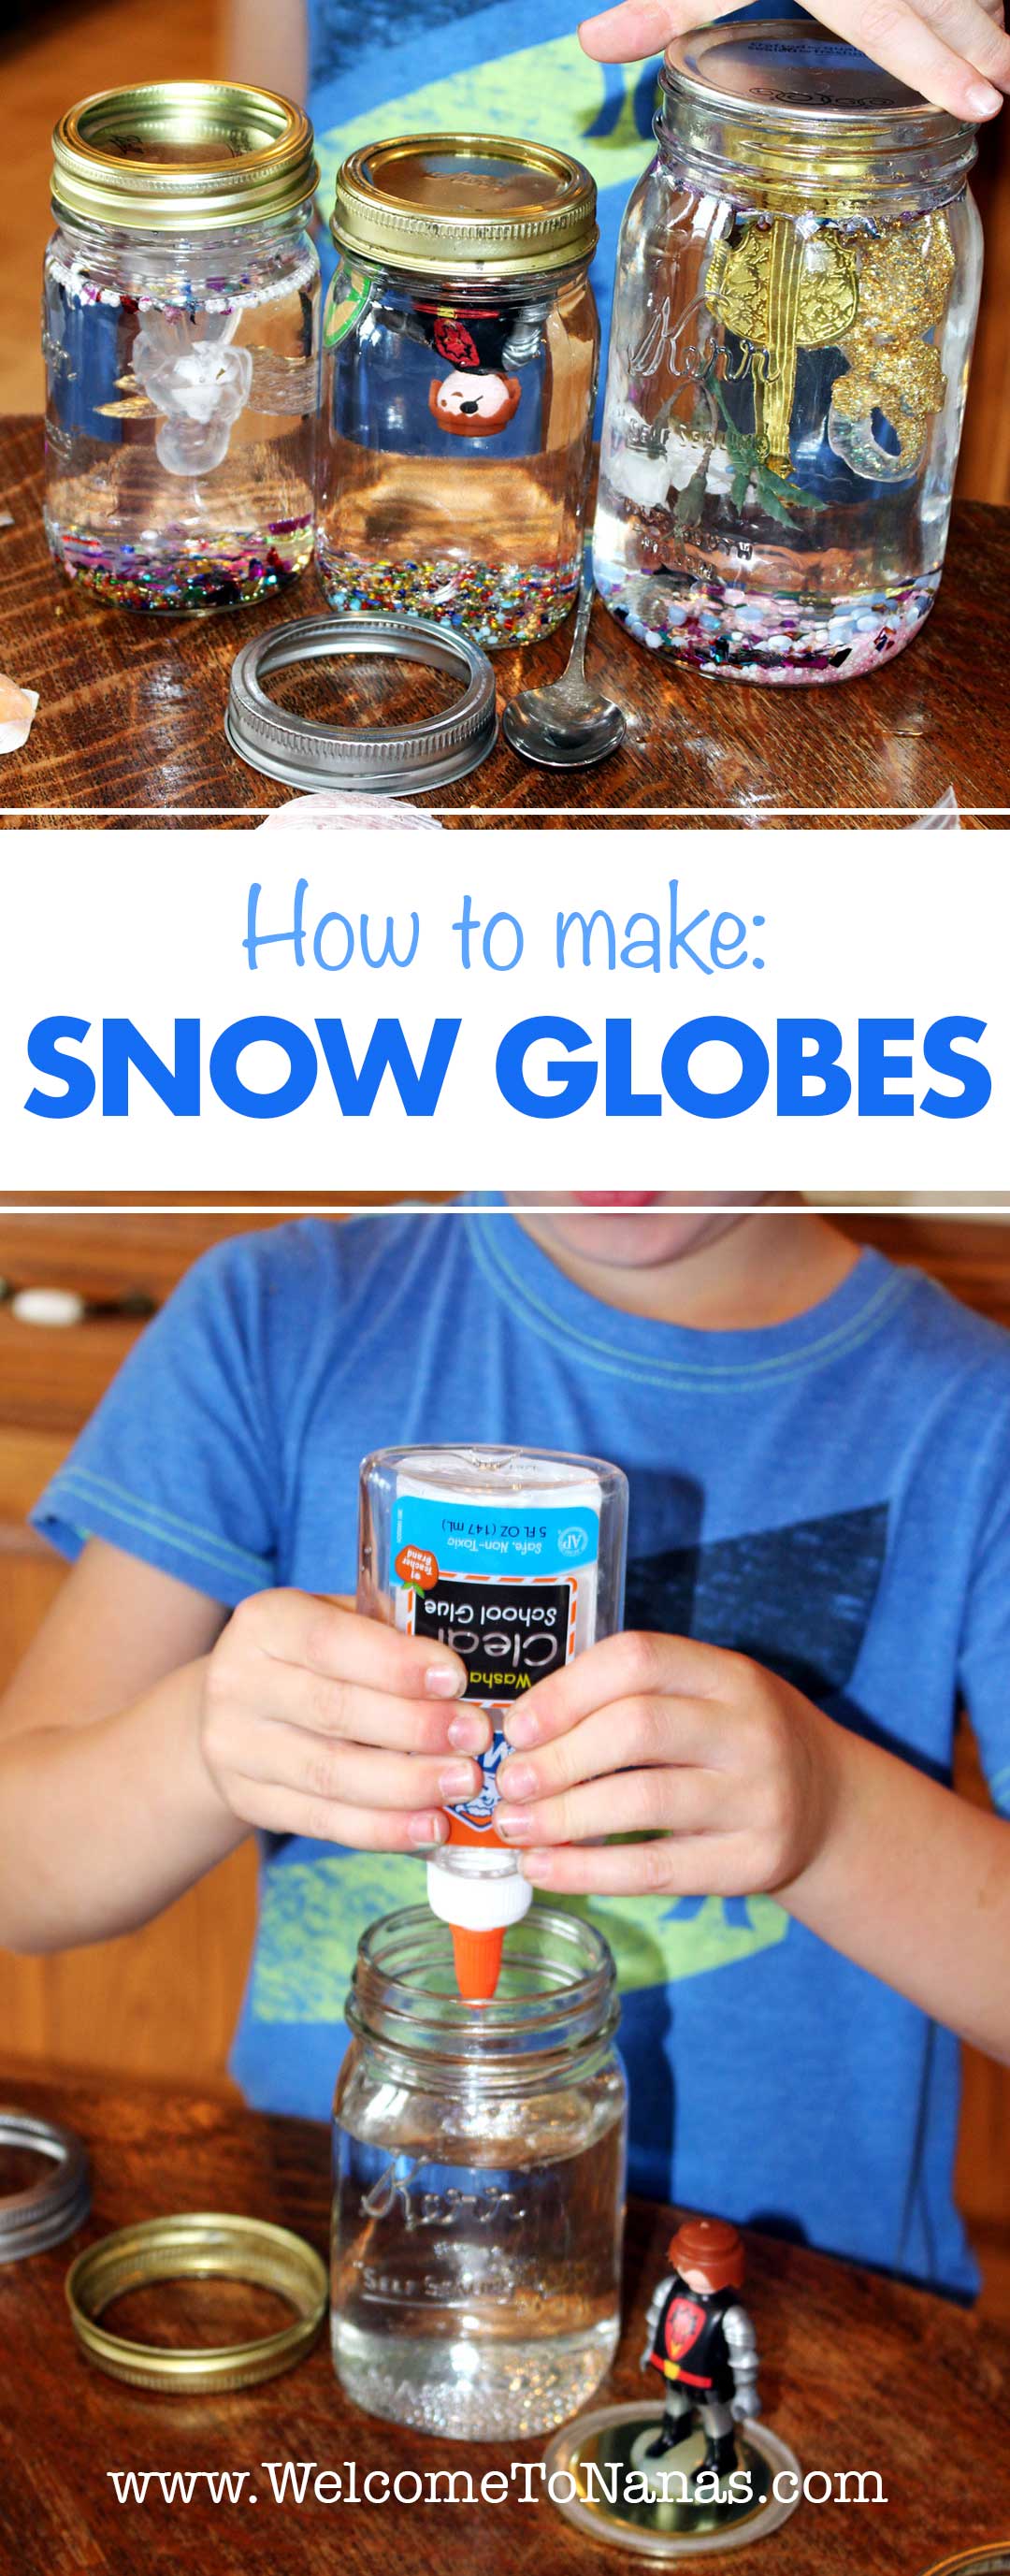 Child adding clear glue to snow globe, and adding lid to finish the snow globe.